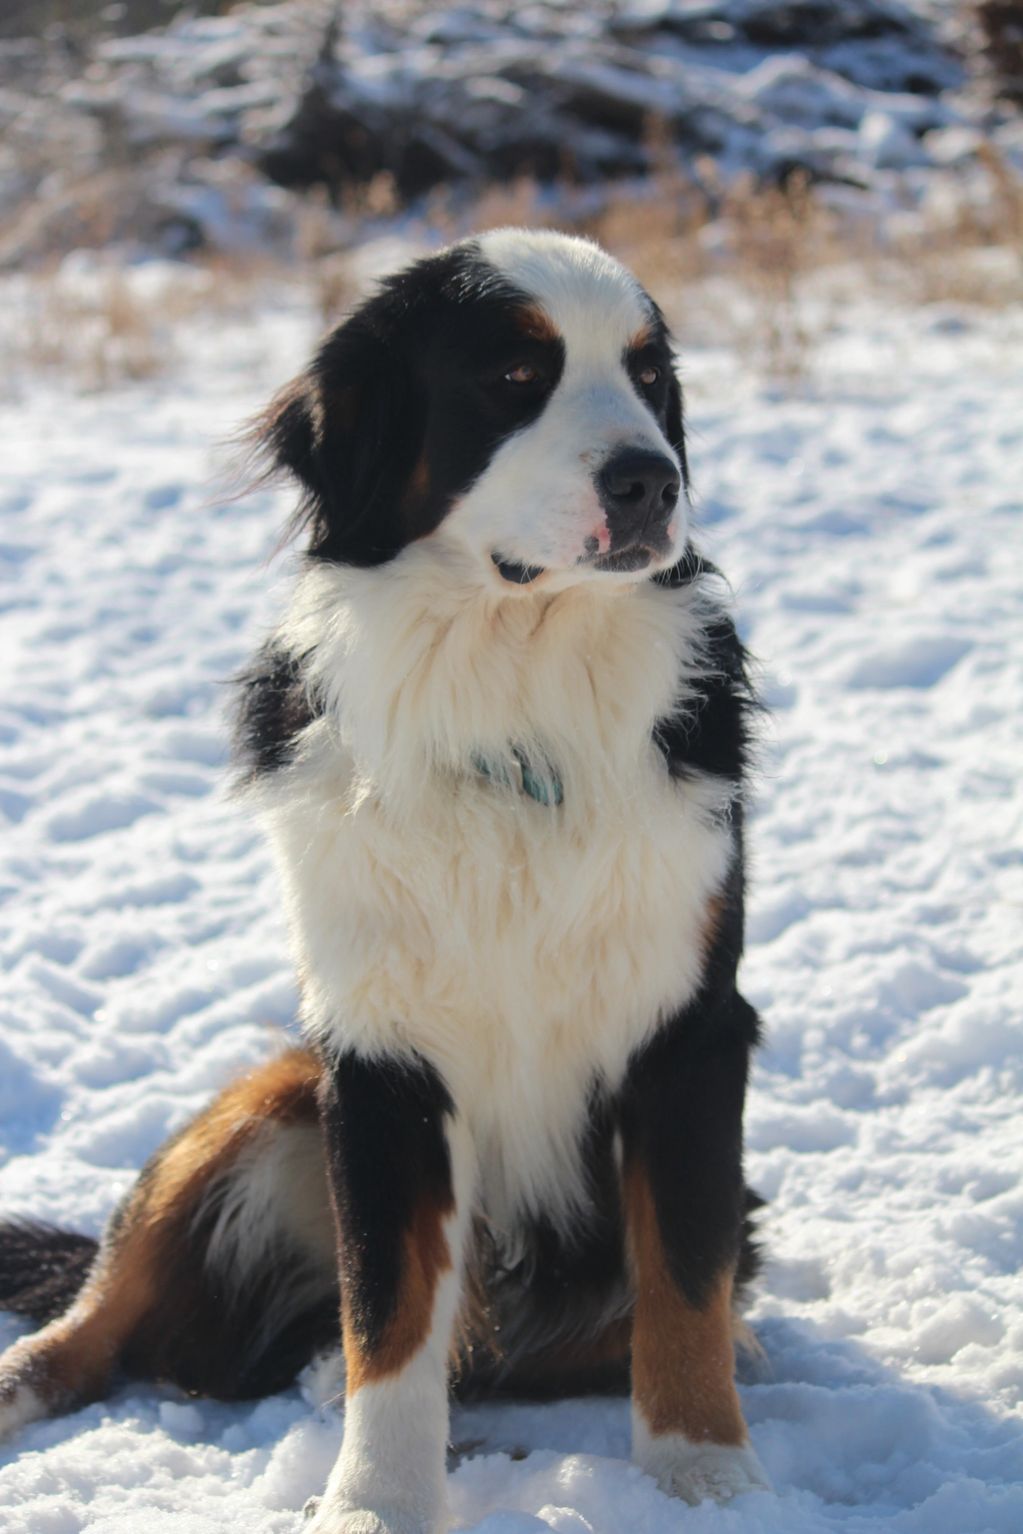 Oscar is a 4 year old Bernese Mountain dog. He loves his belly rubs, couch time and playing ball. He